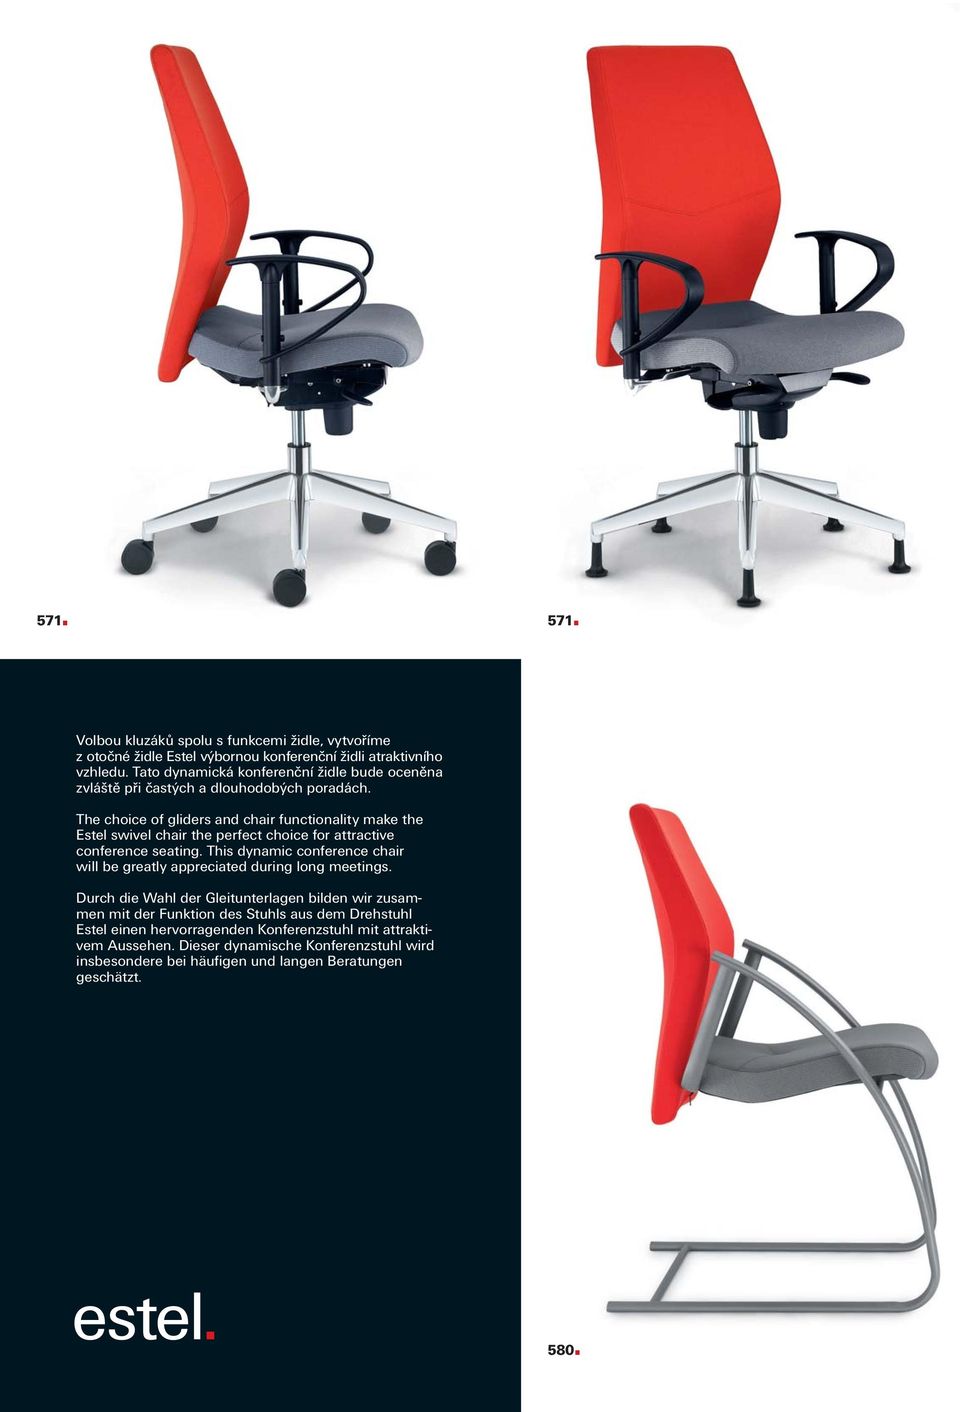 The choice of gliders and chair functionality make the Estel swivel chair the perfect choice for attractive conference seating.